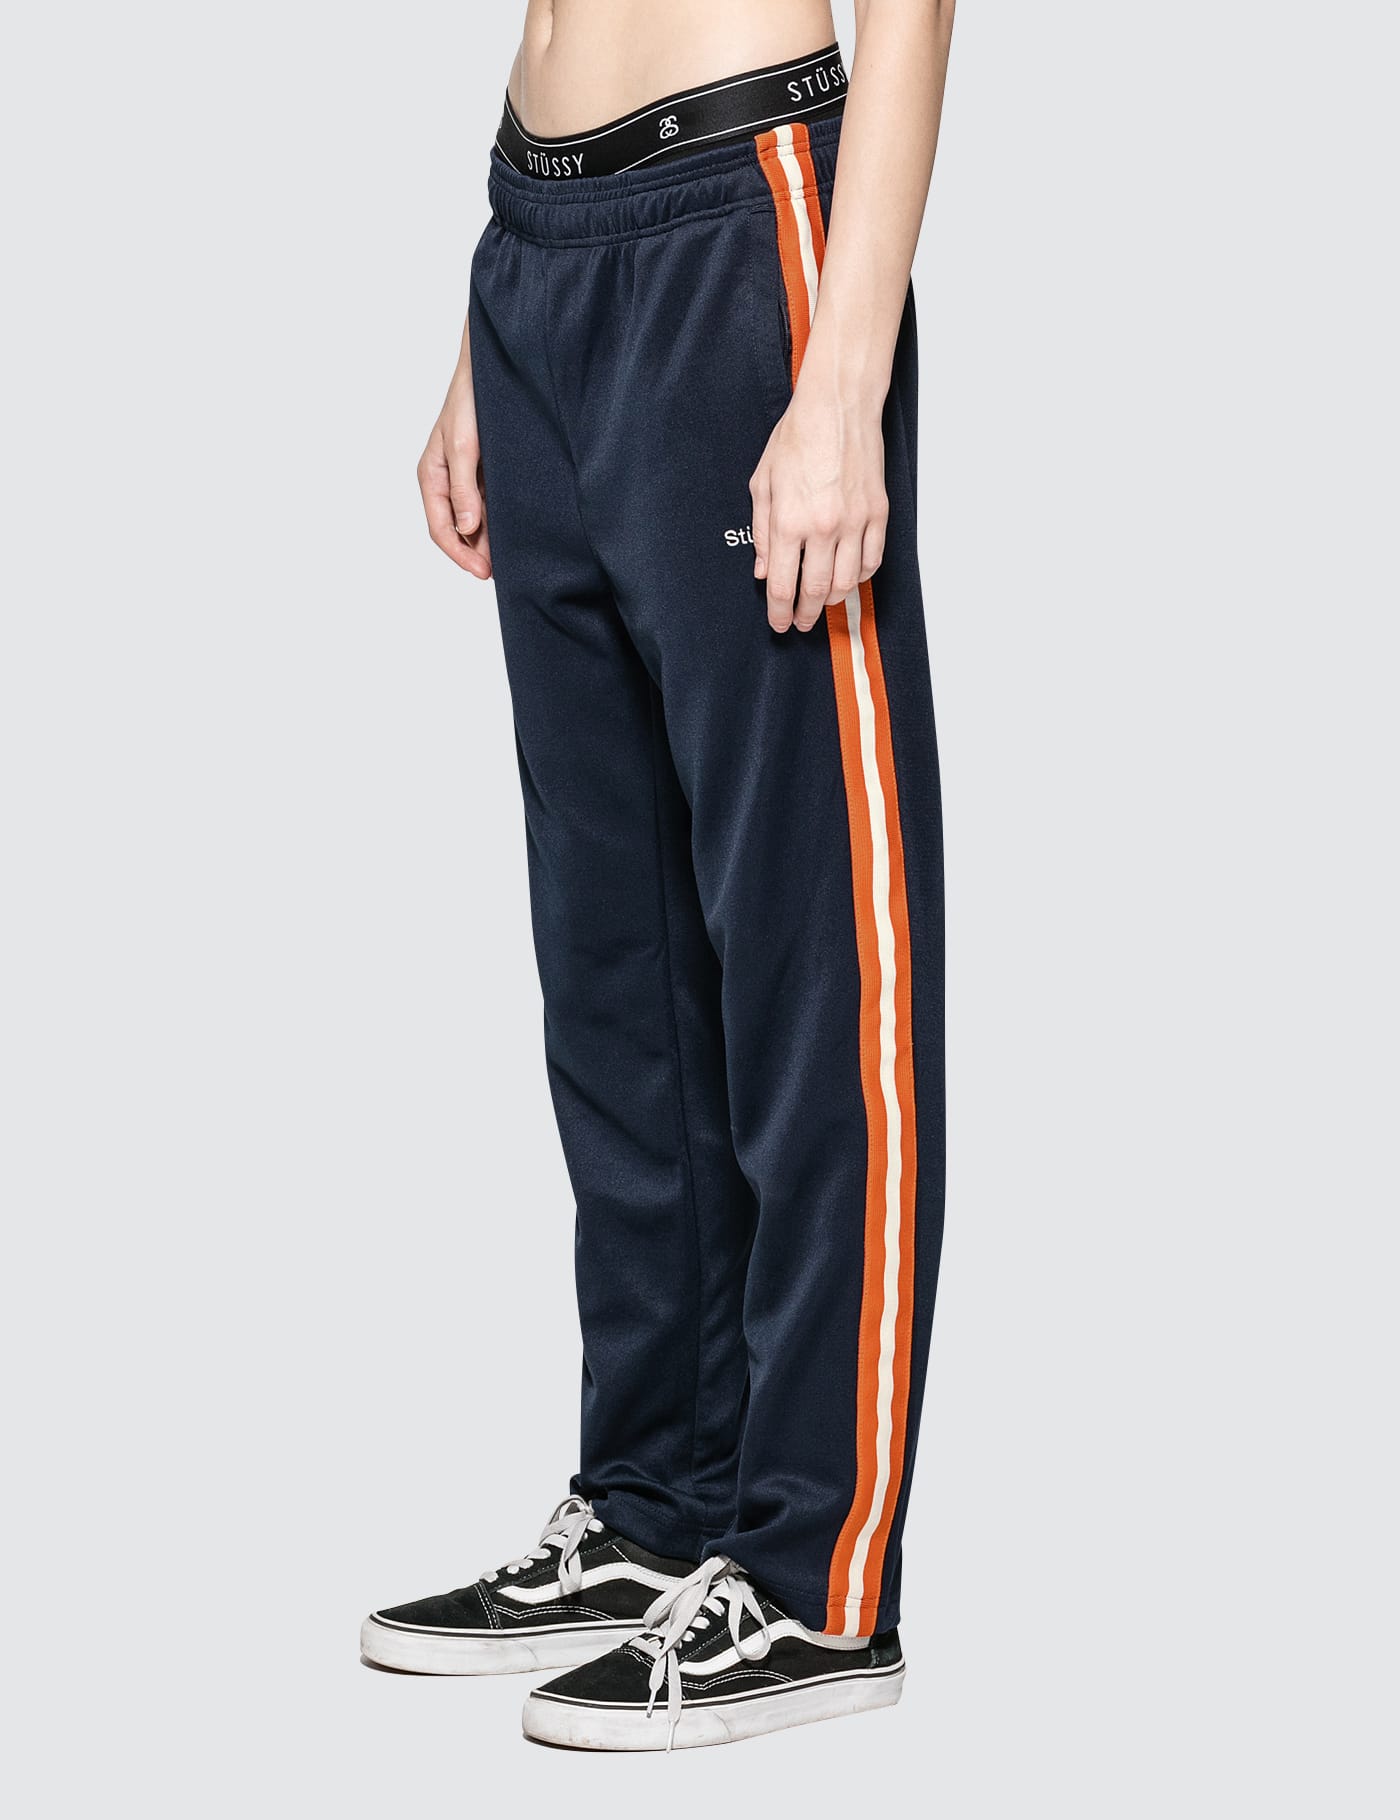 Stüssy - Poly Track Pant | HBX - Globally Curated Fashion and 